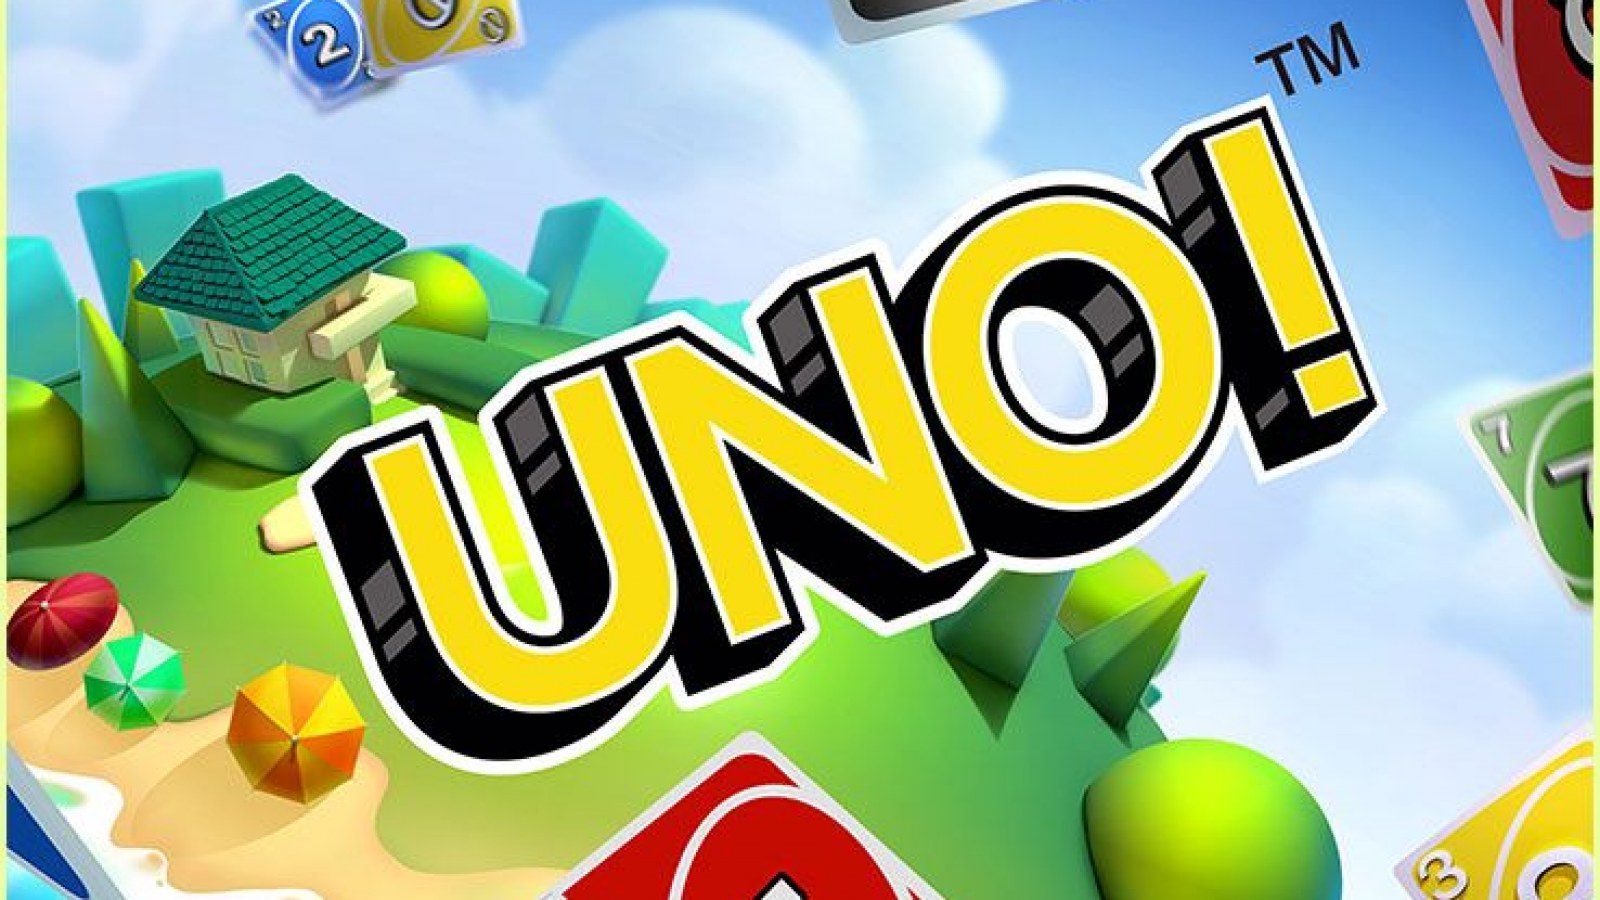 UNO! Mobile Game - 🍬It's National Candy Day! 🍬 Be sweet, and throw candy  at players in Spectate Mode to build up their Charisma! #UNOmobilegame #UNO  #nationalcandyday #candyday #candy #charisma